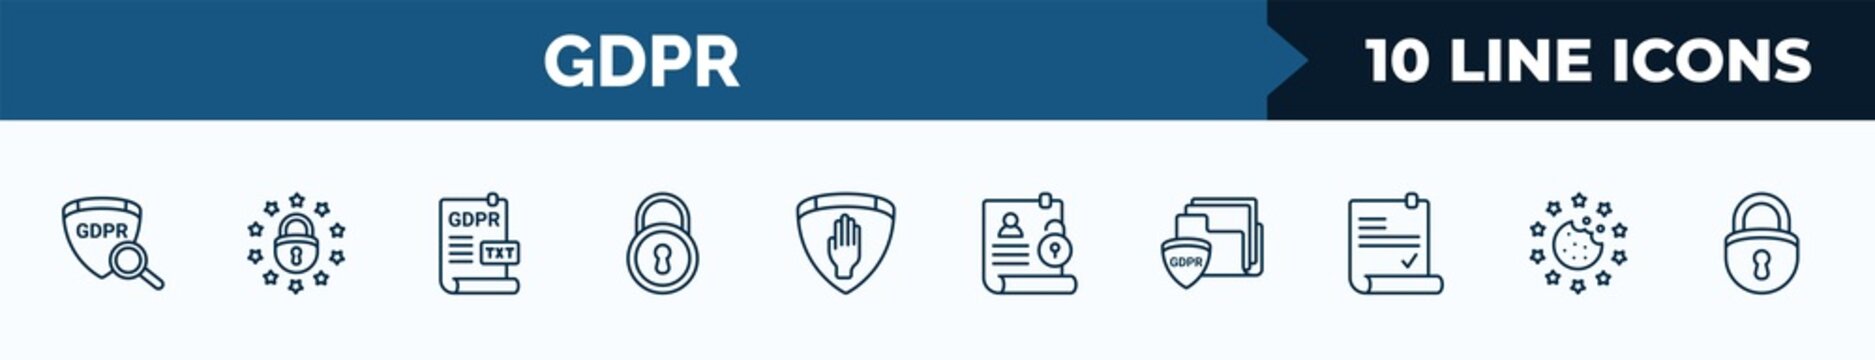 set of 10 gdpr web icons in outline style. thin line icons such as transparency, eu, text file, key, right to objection, right to access, portfolio, cookie vector illustration.